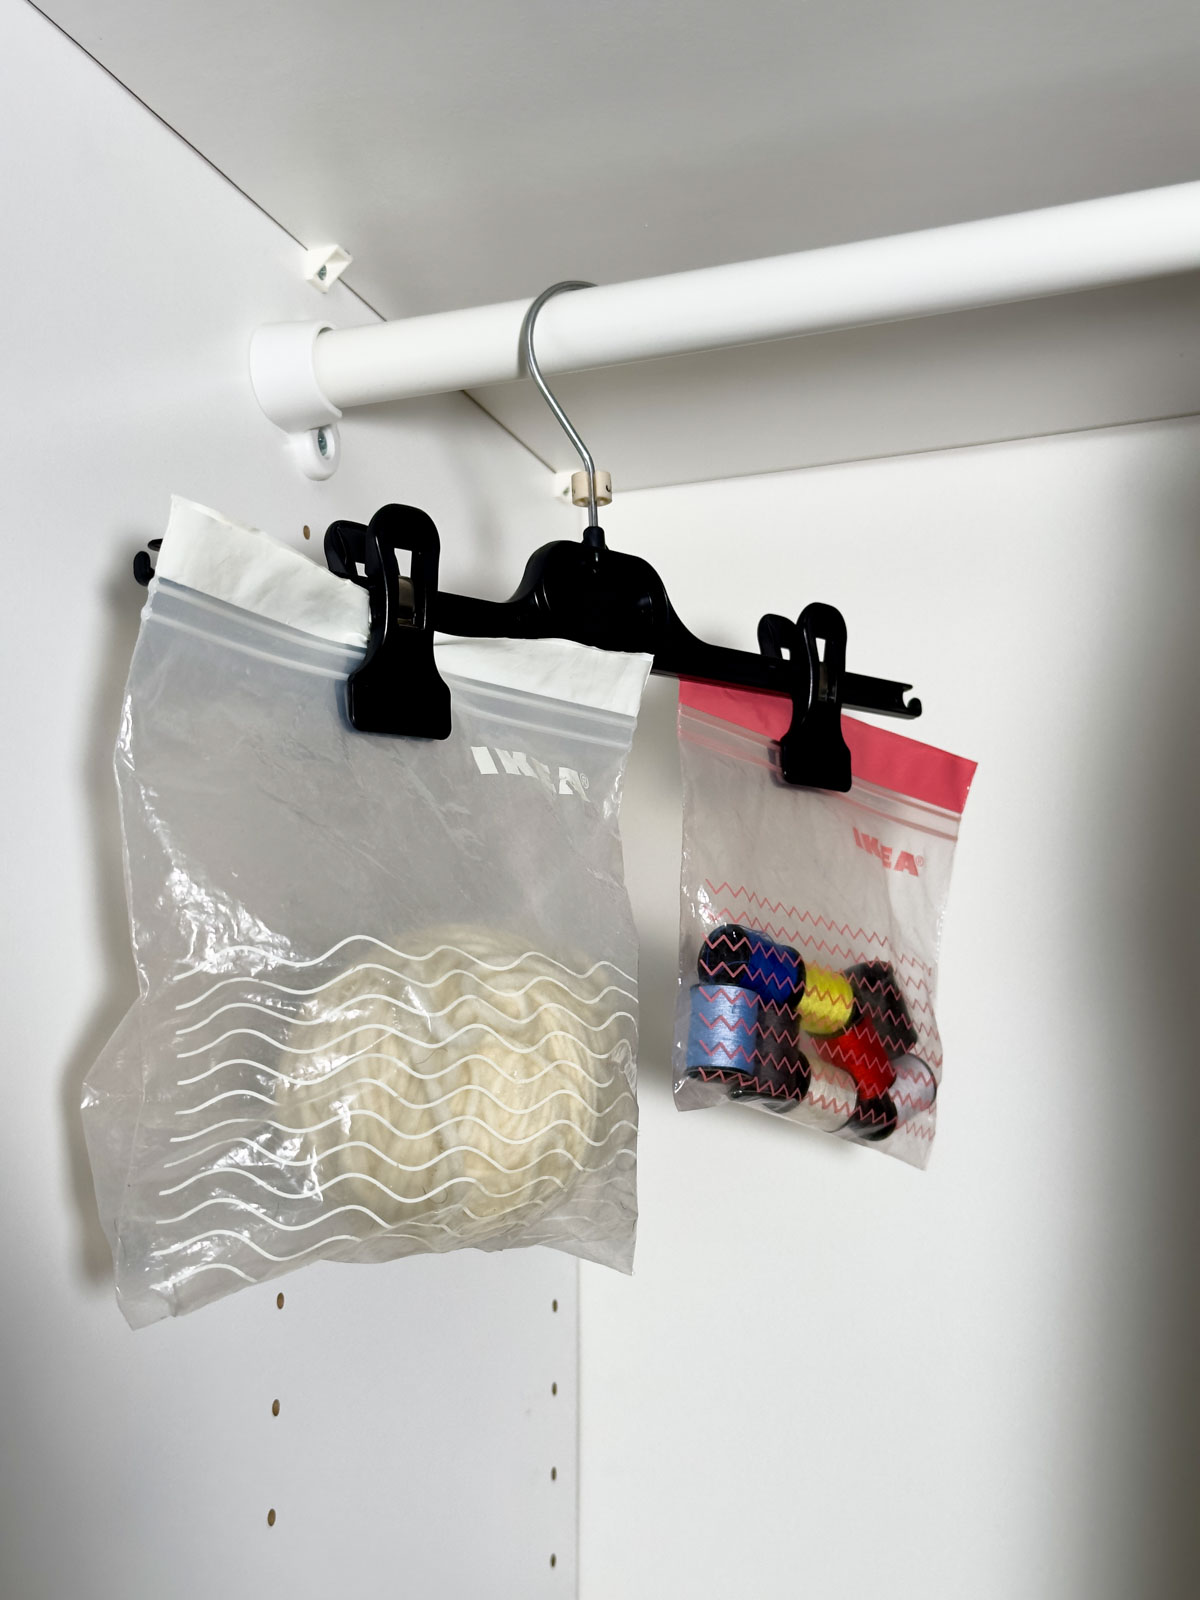 Use Hangers with Plastic Bags to Store Craft Supplies